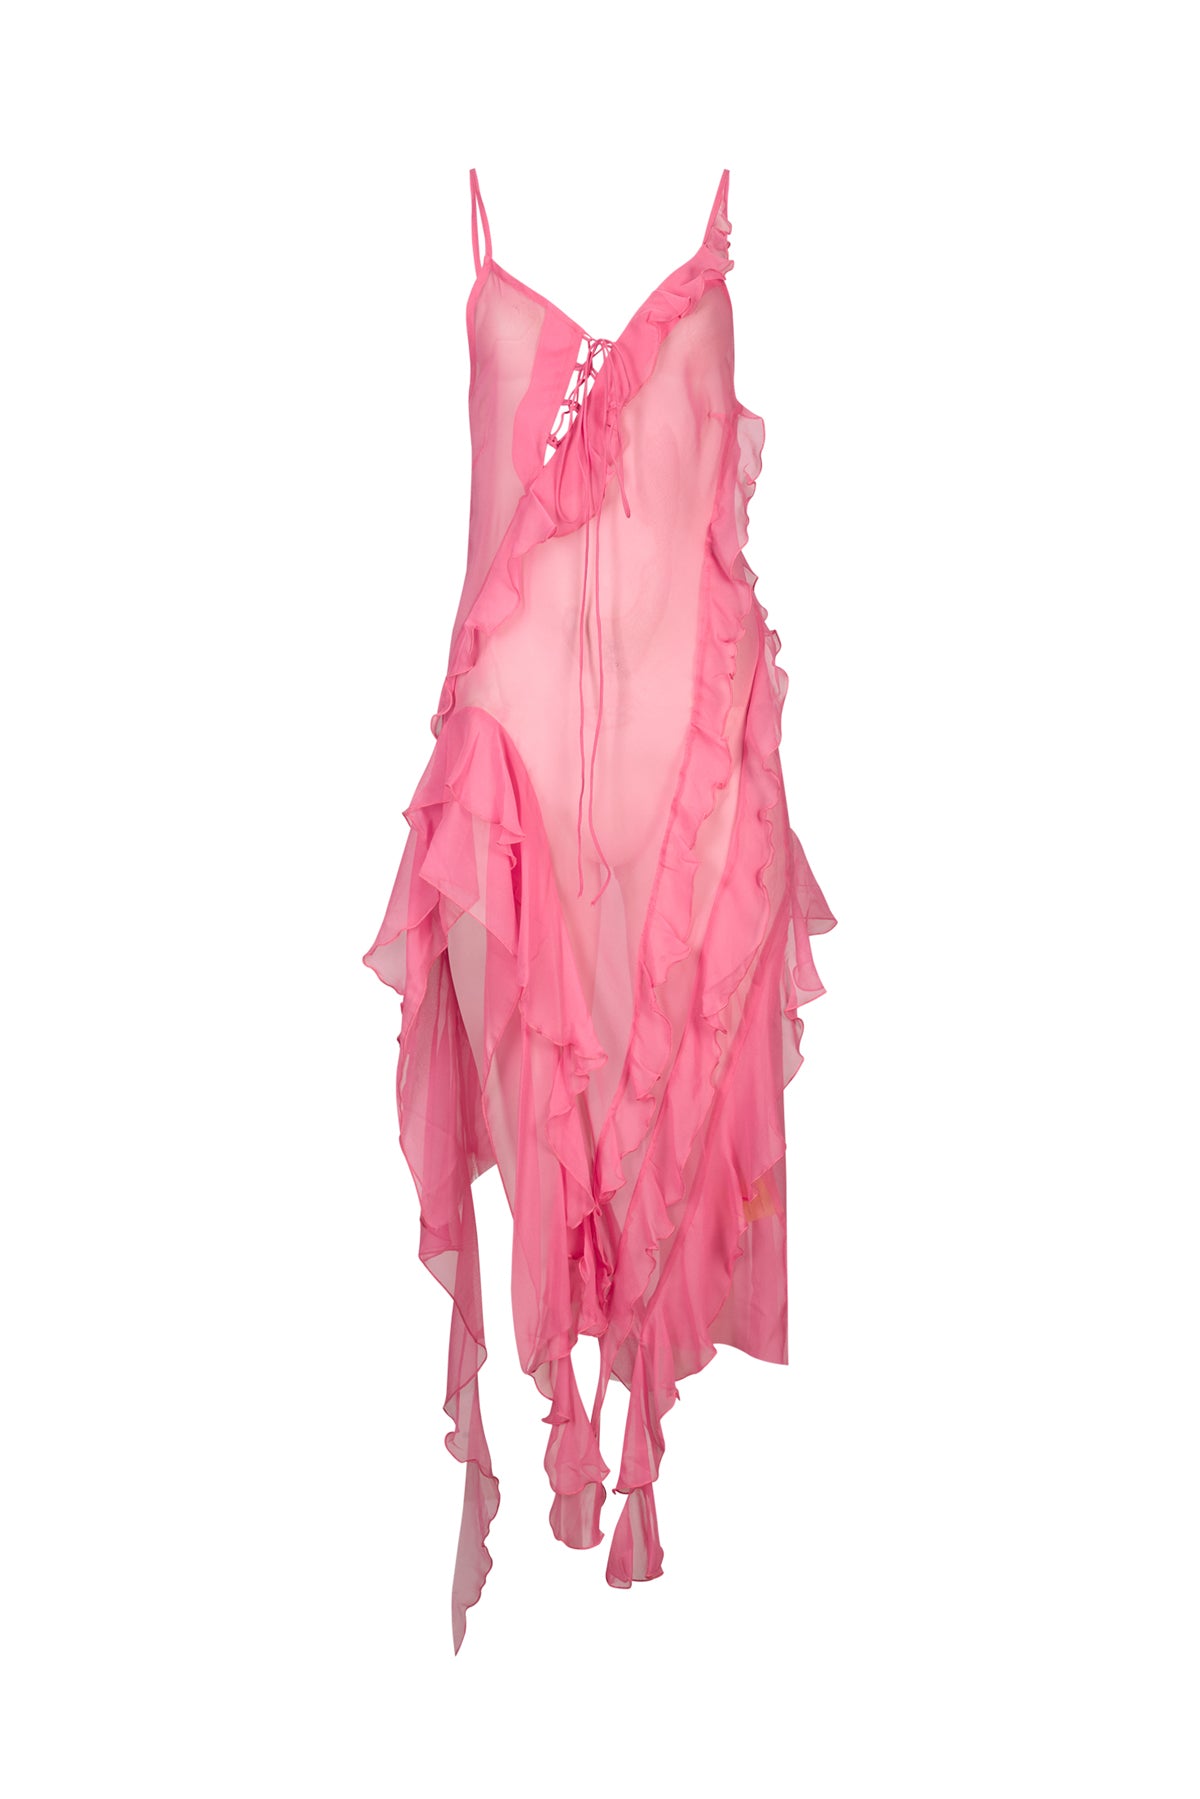 PINK SILK STRAP DRESS WTH FRONT LACE UP marques almeida